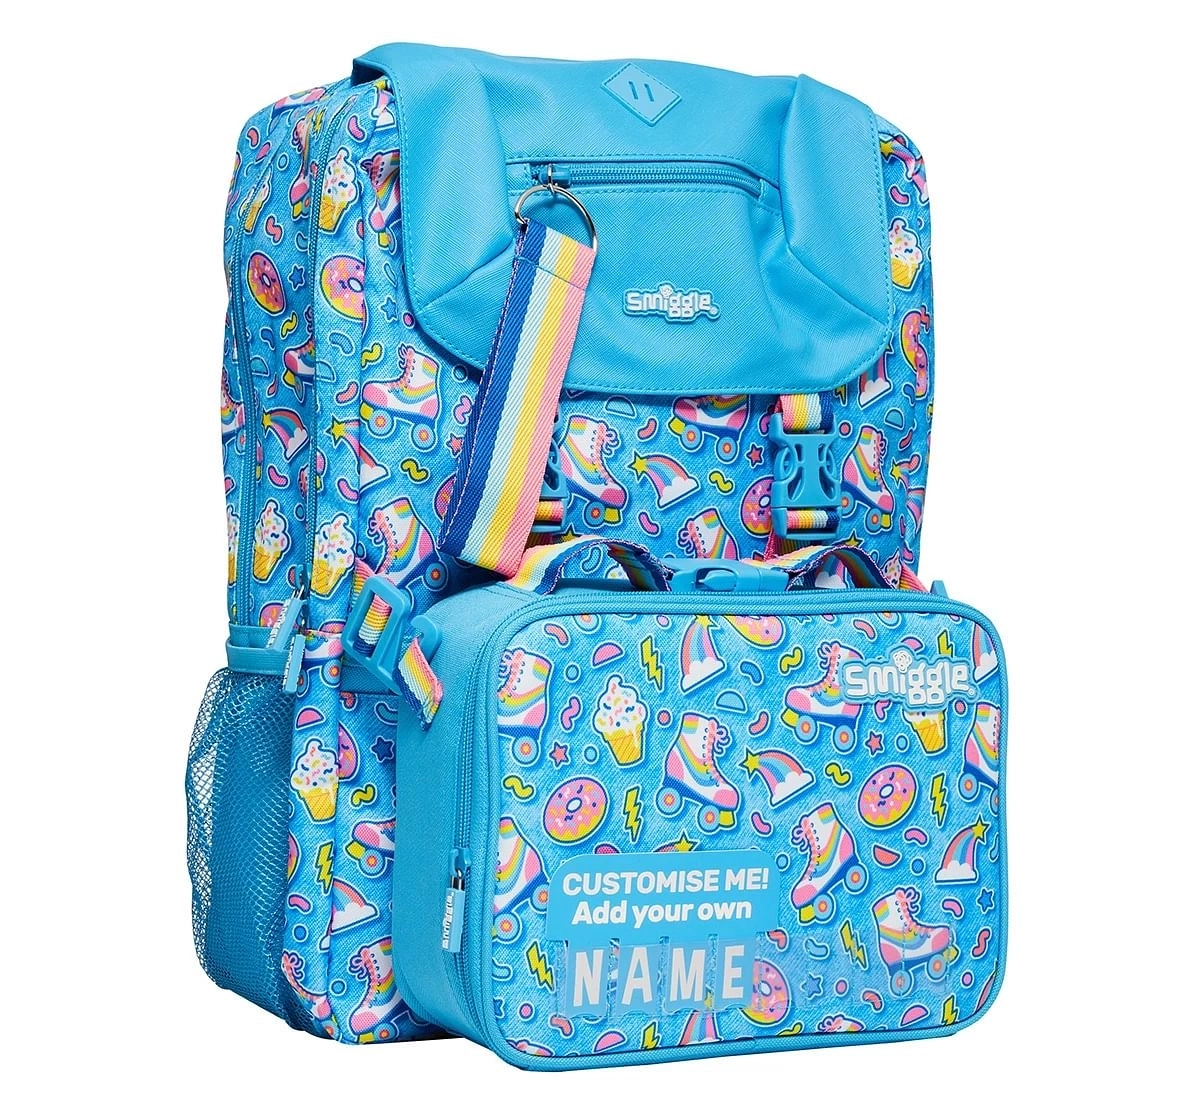 Smiggle Bright Side Foldover Attachable Colourful printed bag for Kids 3Y+, Multicolour